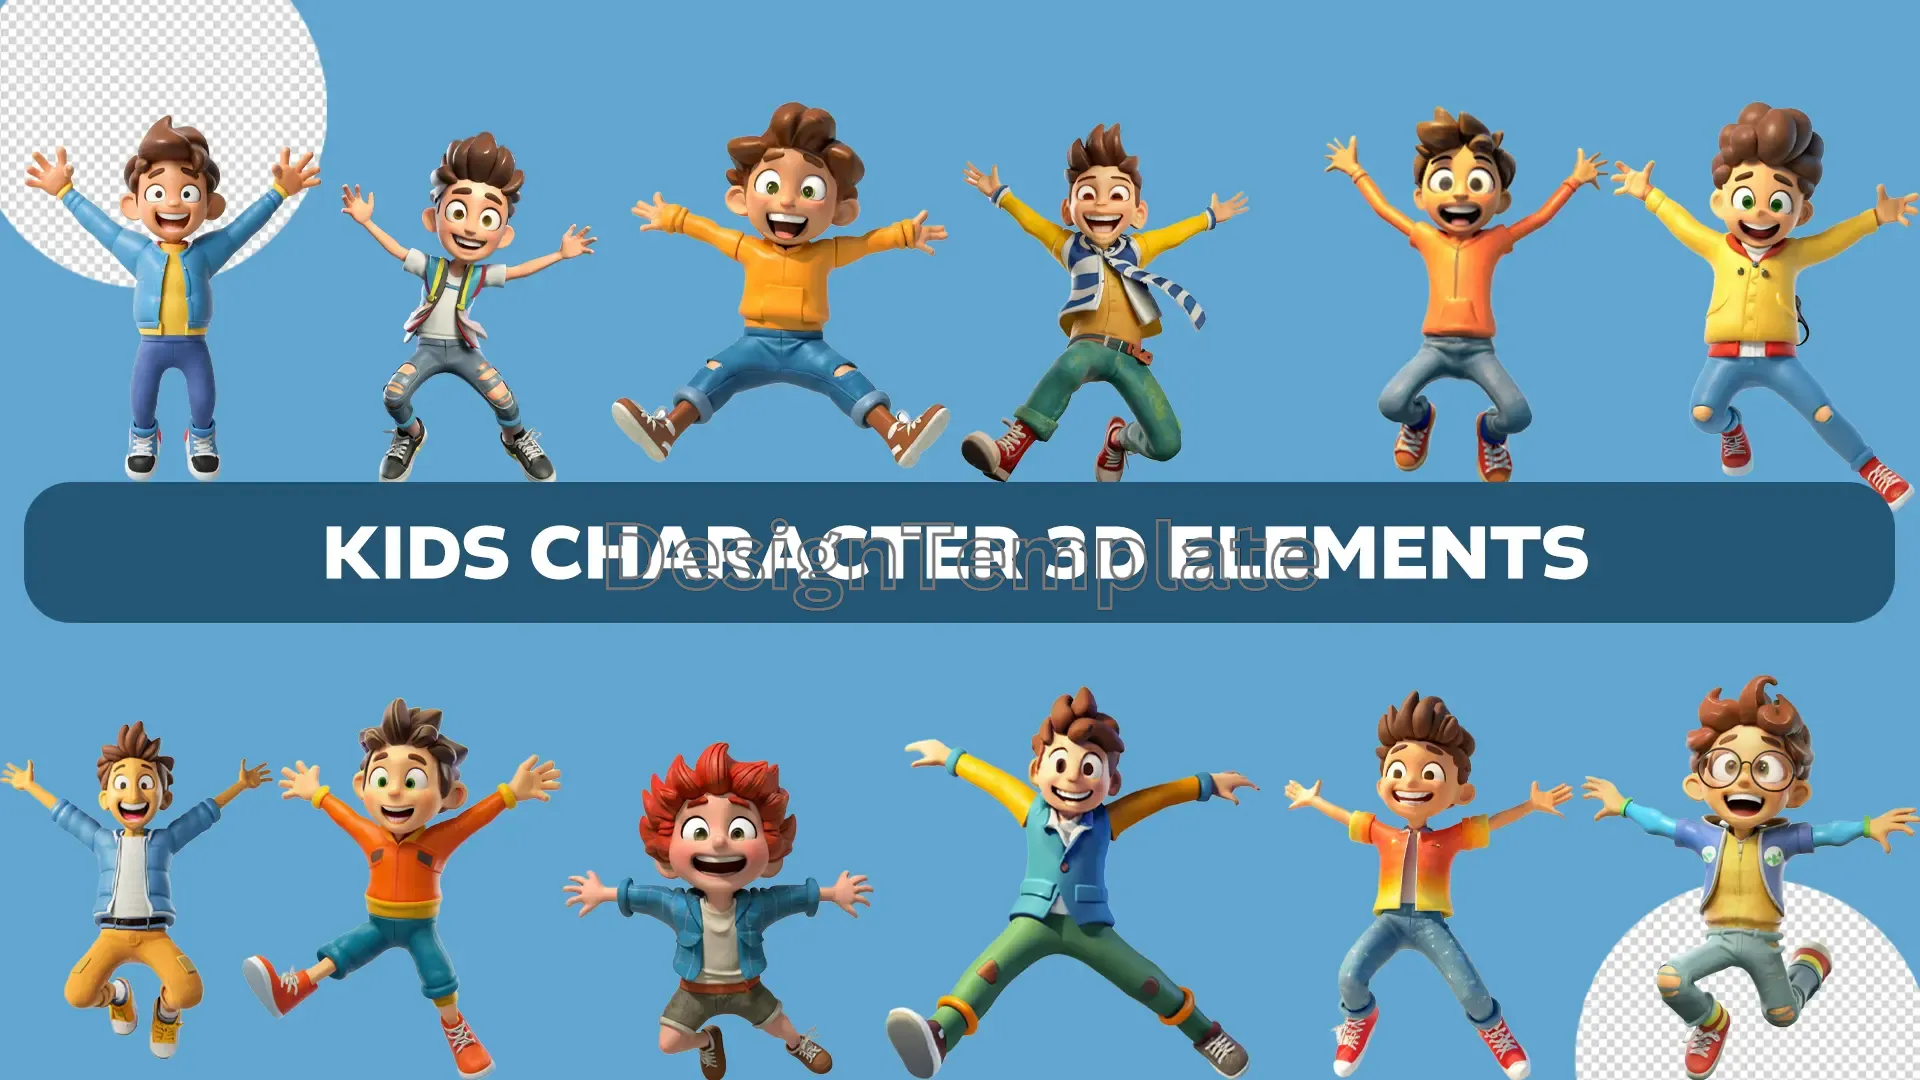 Playground Pals Kids Character 3D Elements Pack image